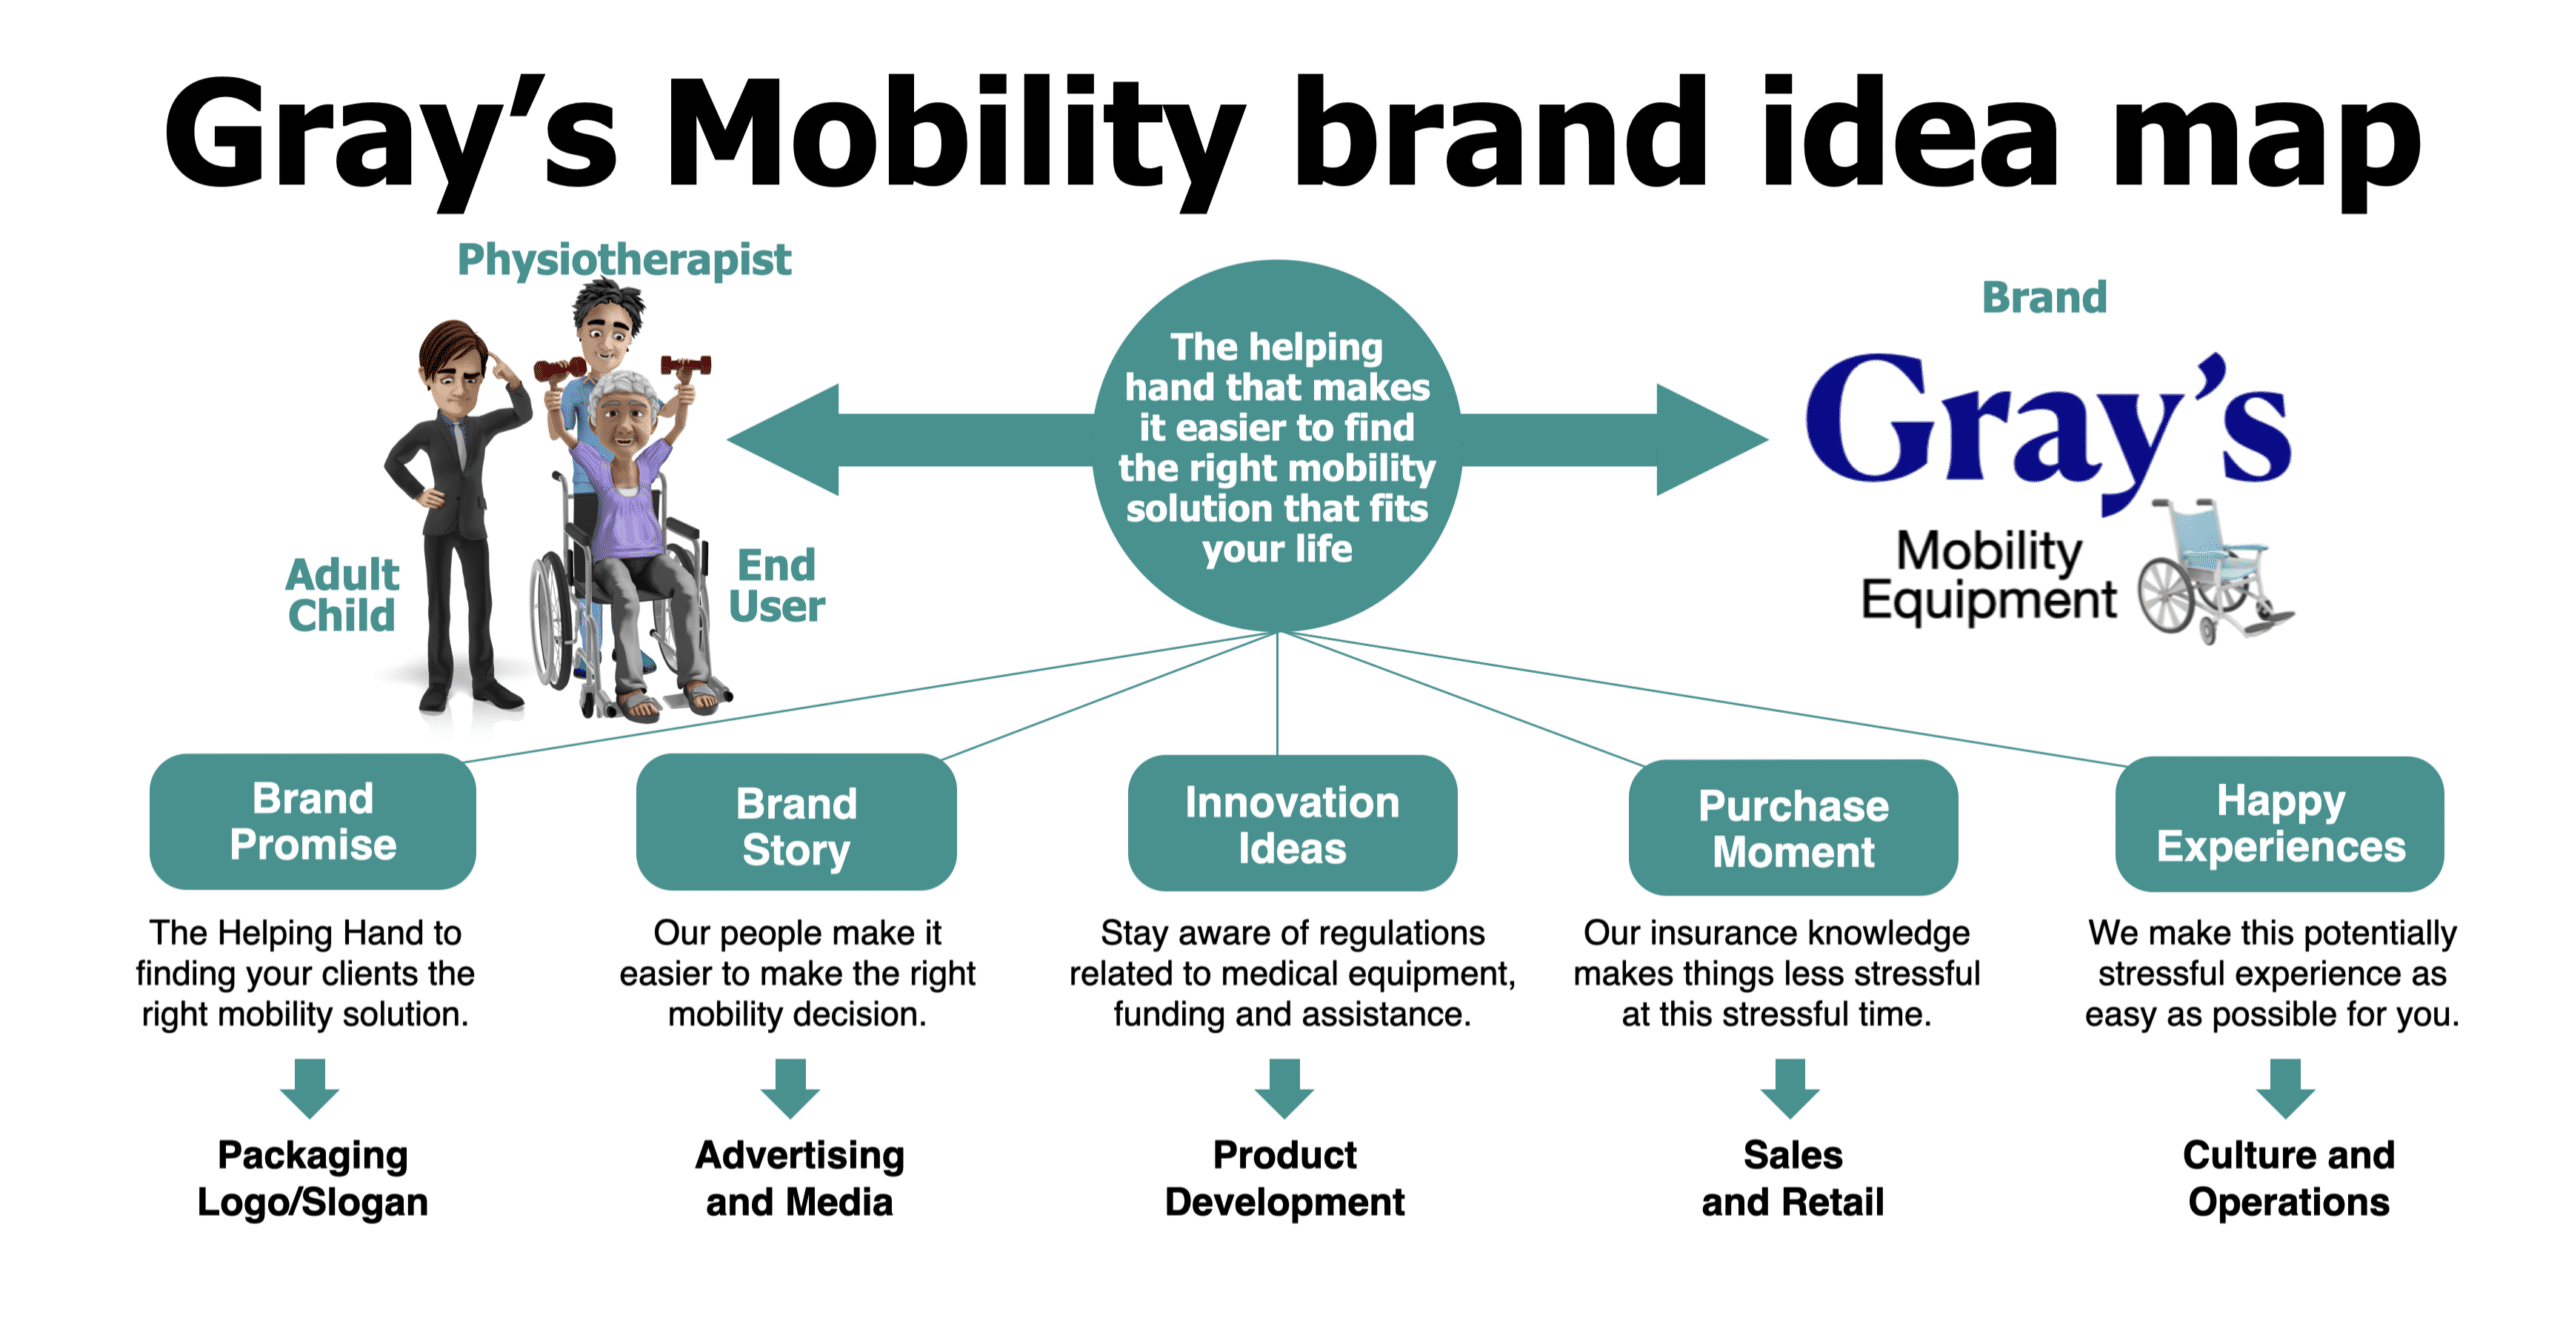 Healthcare Brands Organizing Brand Idea for Gray's Mobility